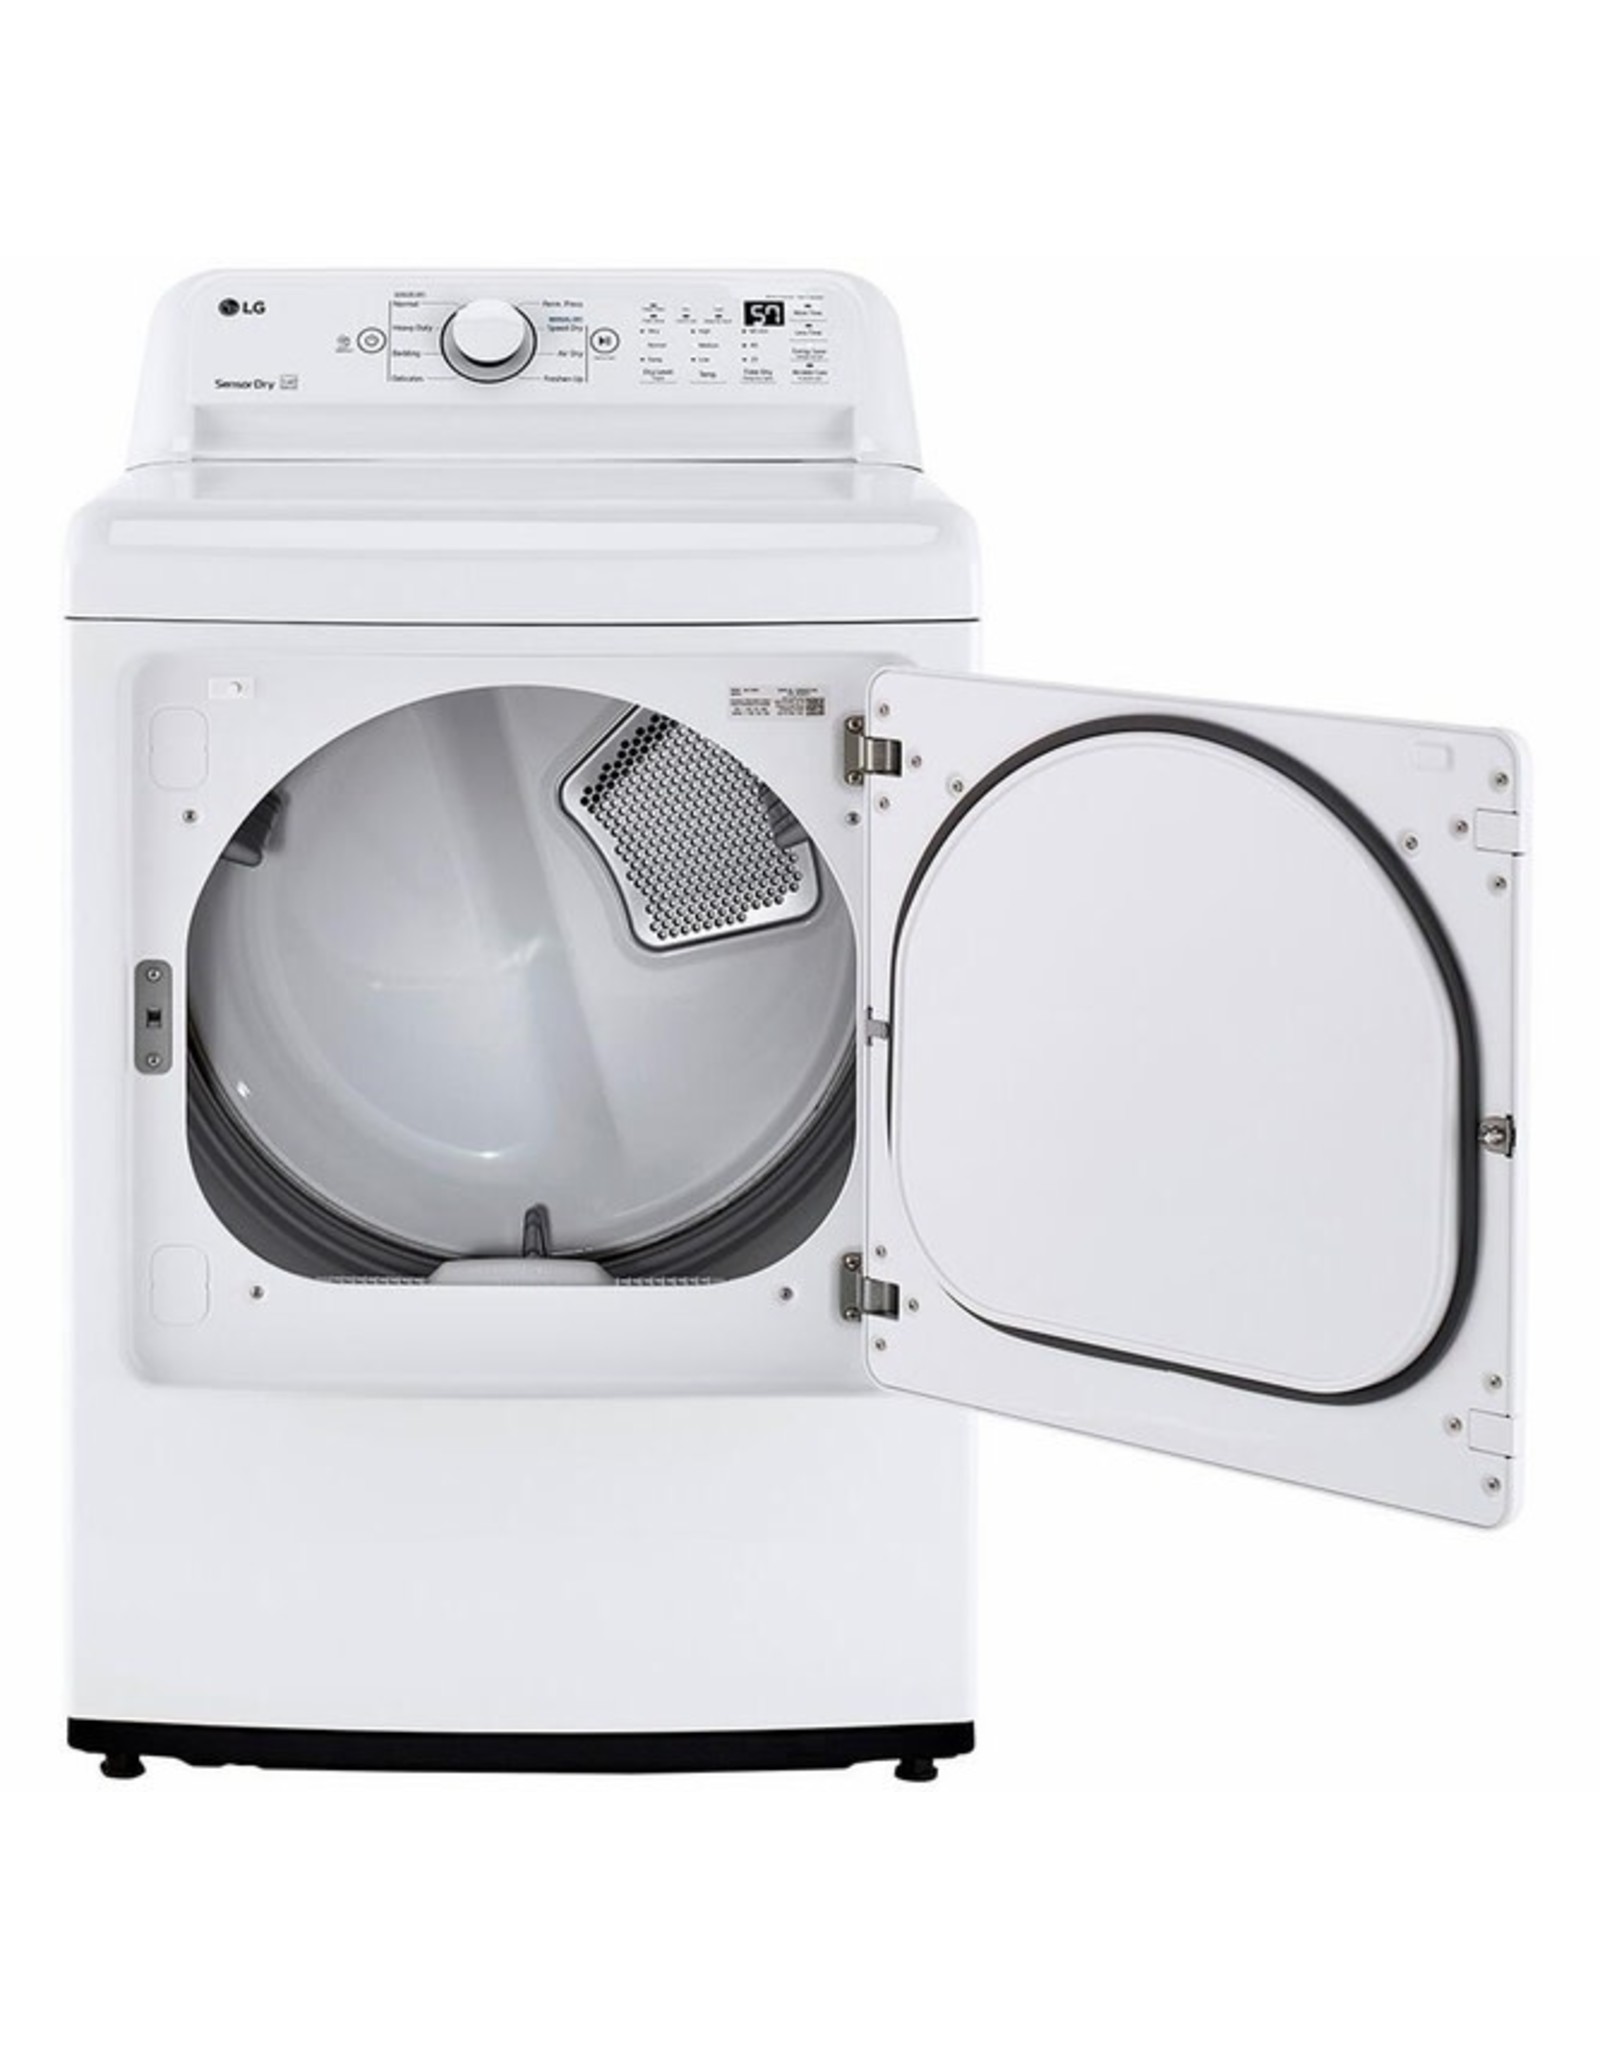 lg DLE7000W 7.3 cu. ft. Ultra Large Capacity Electric Dryer with Sensor Dry Technology